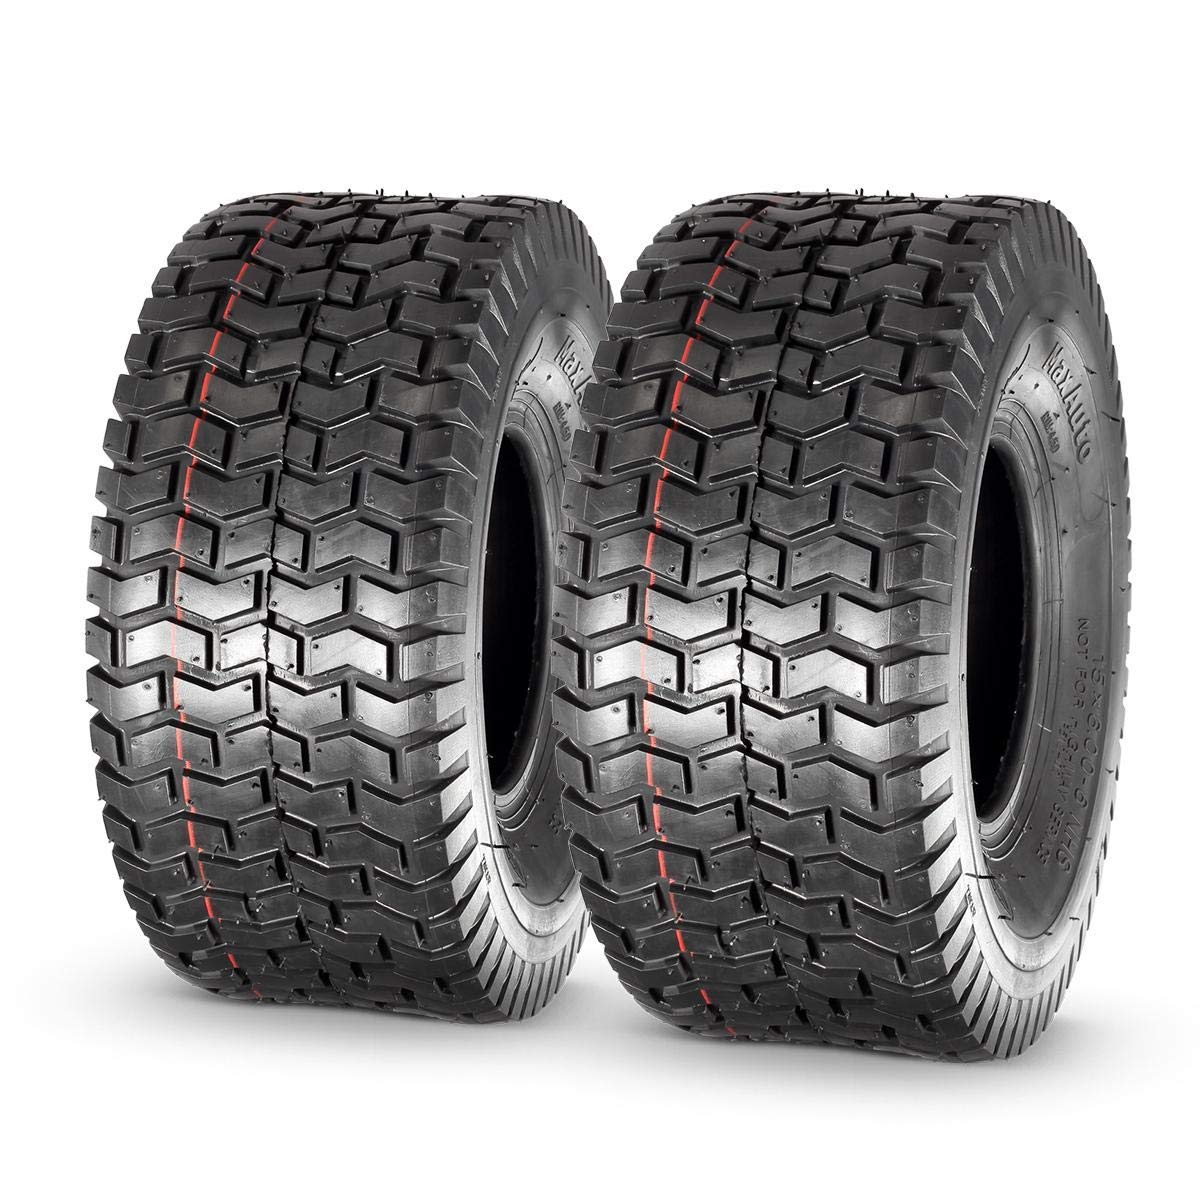 MaxAuto 15x6.00-6nhs Lawn Mower Tires 15x6x6 Lawn Tractor Tire 15x6-6 Turf Tires, 4 Ply Tubeless Tire, 570 lbs Capacity, Set of 2